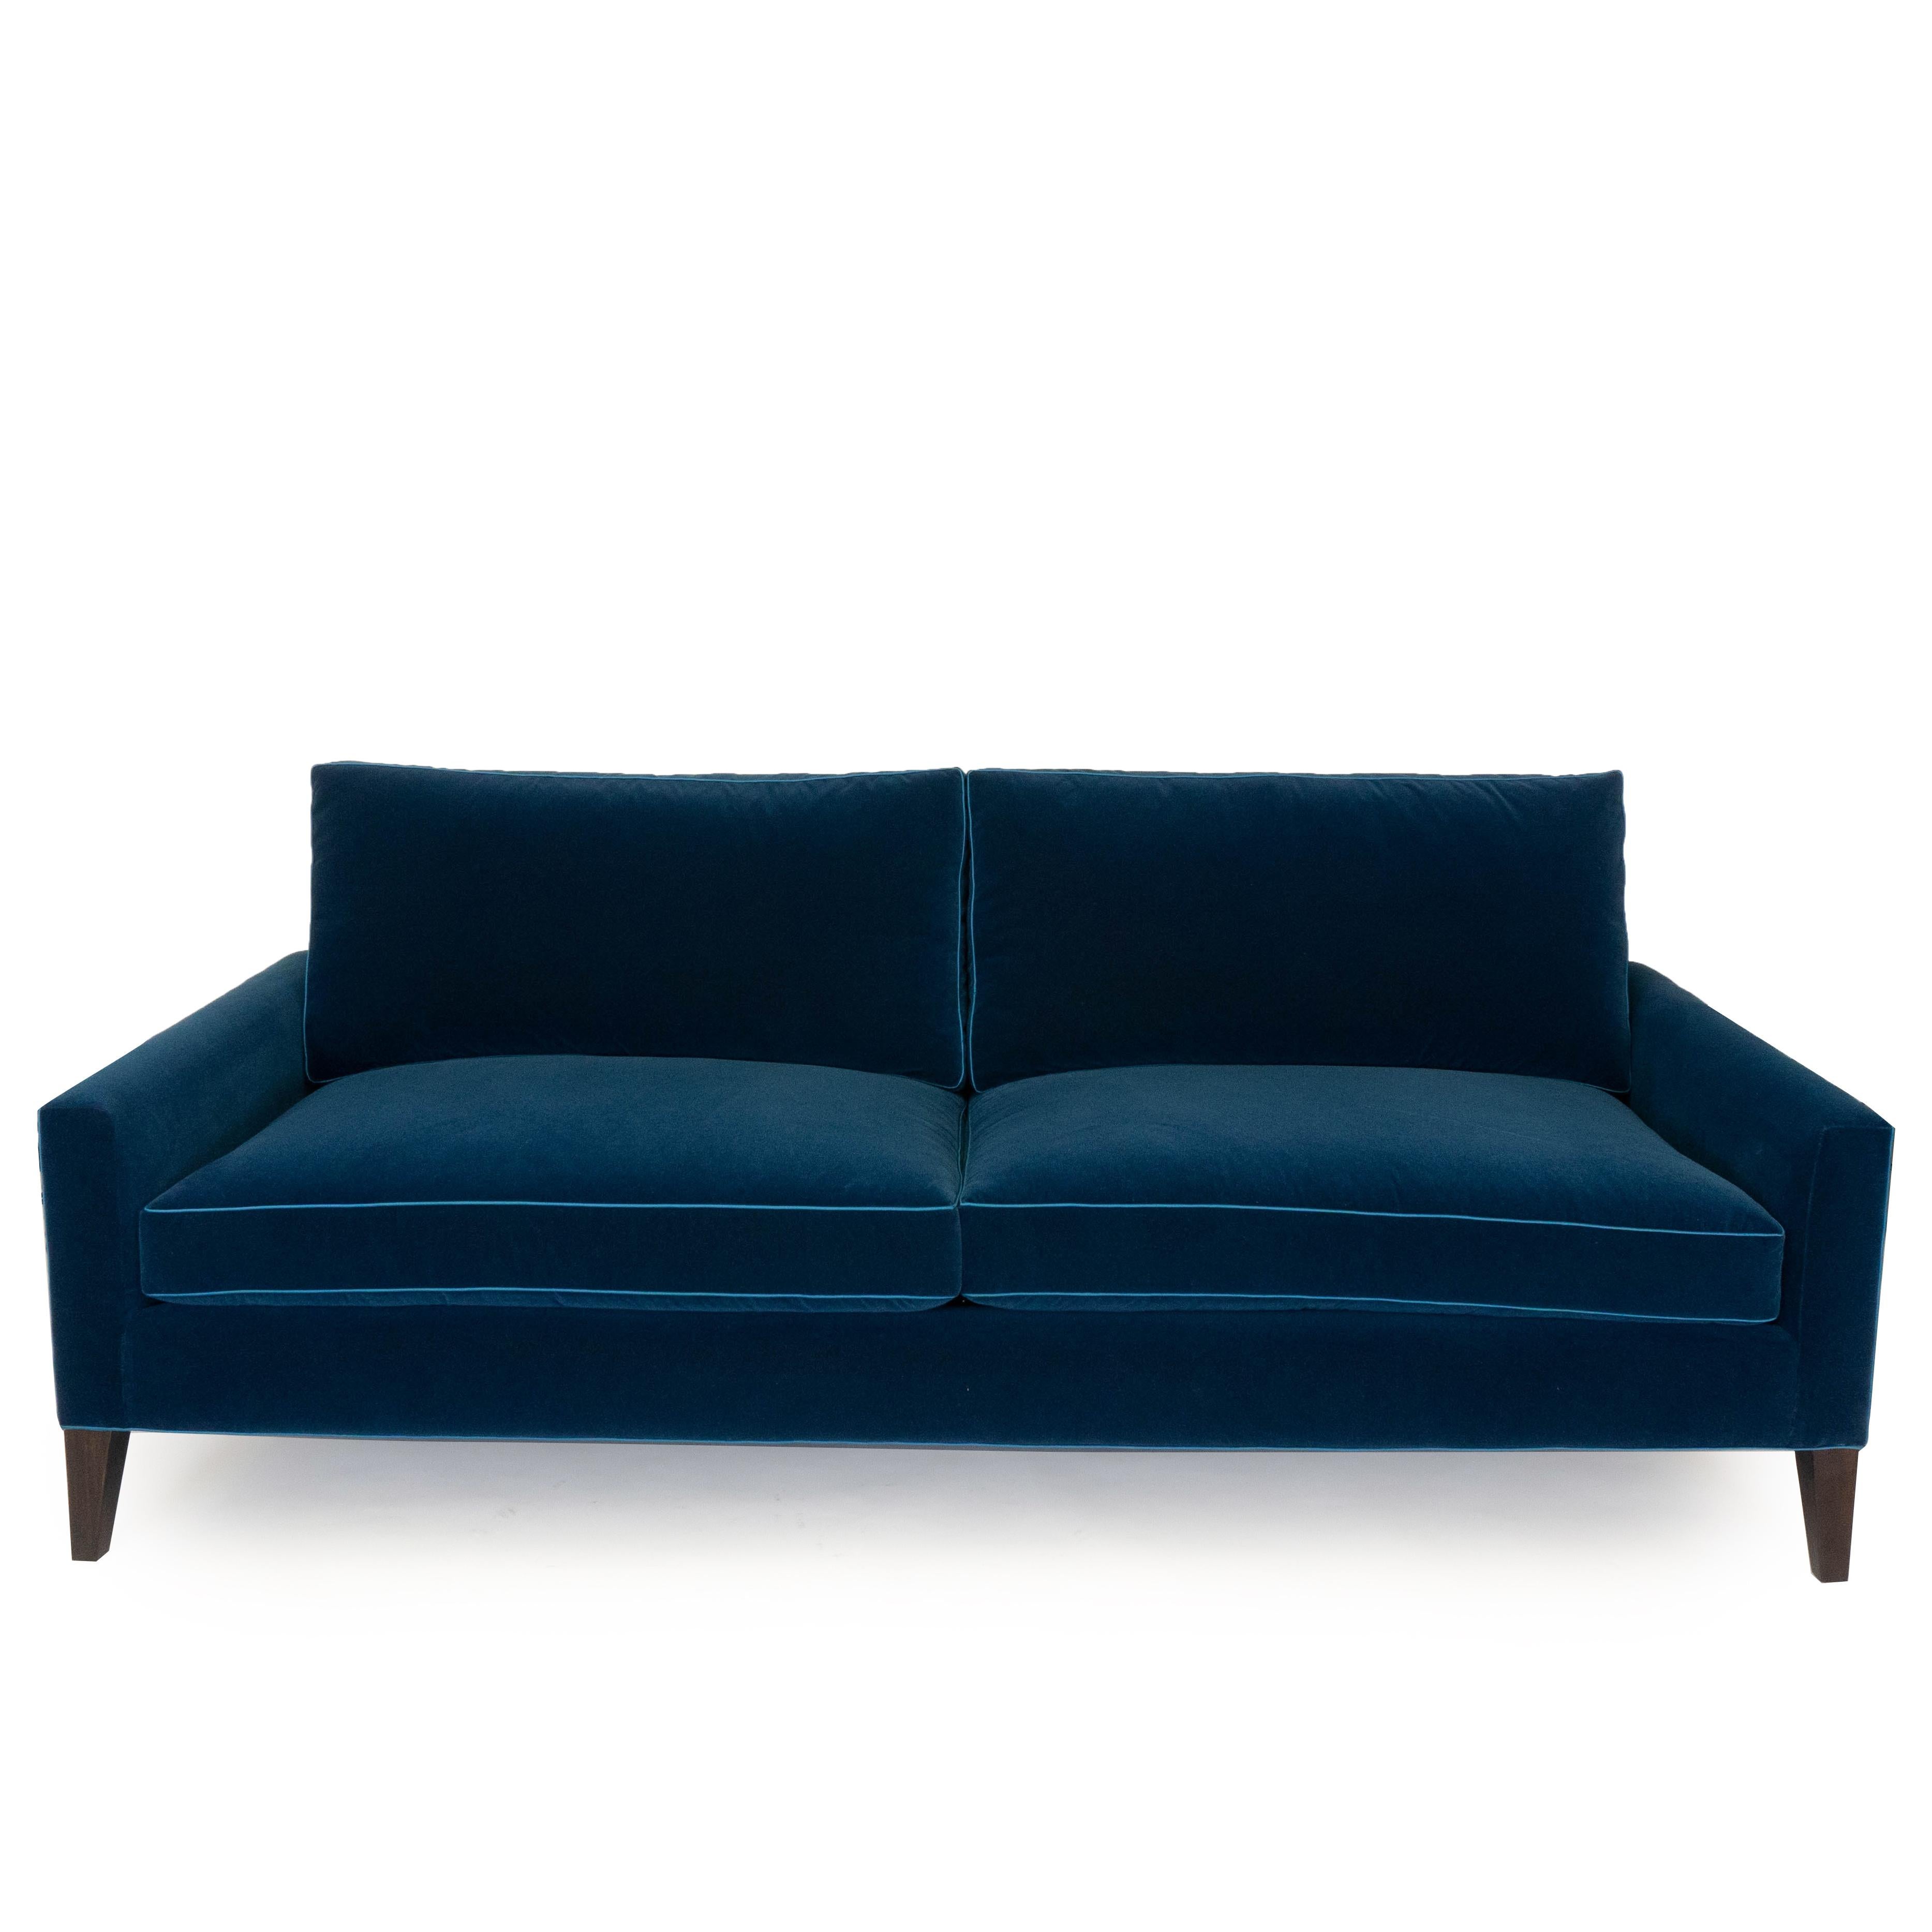 Our modern two cushion sofa is upholstered in a dark blue velvet with an infinity cotton feel and features a light blue polyester trim. This sofa is handmade with poplar wood and finished with a dark walnut painted leg. The cushions are made with 5